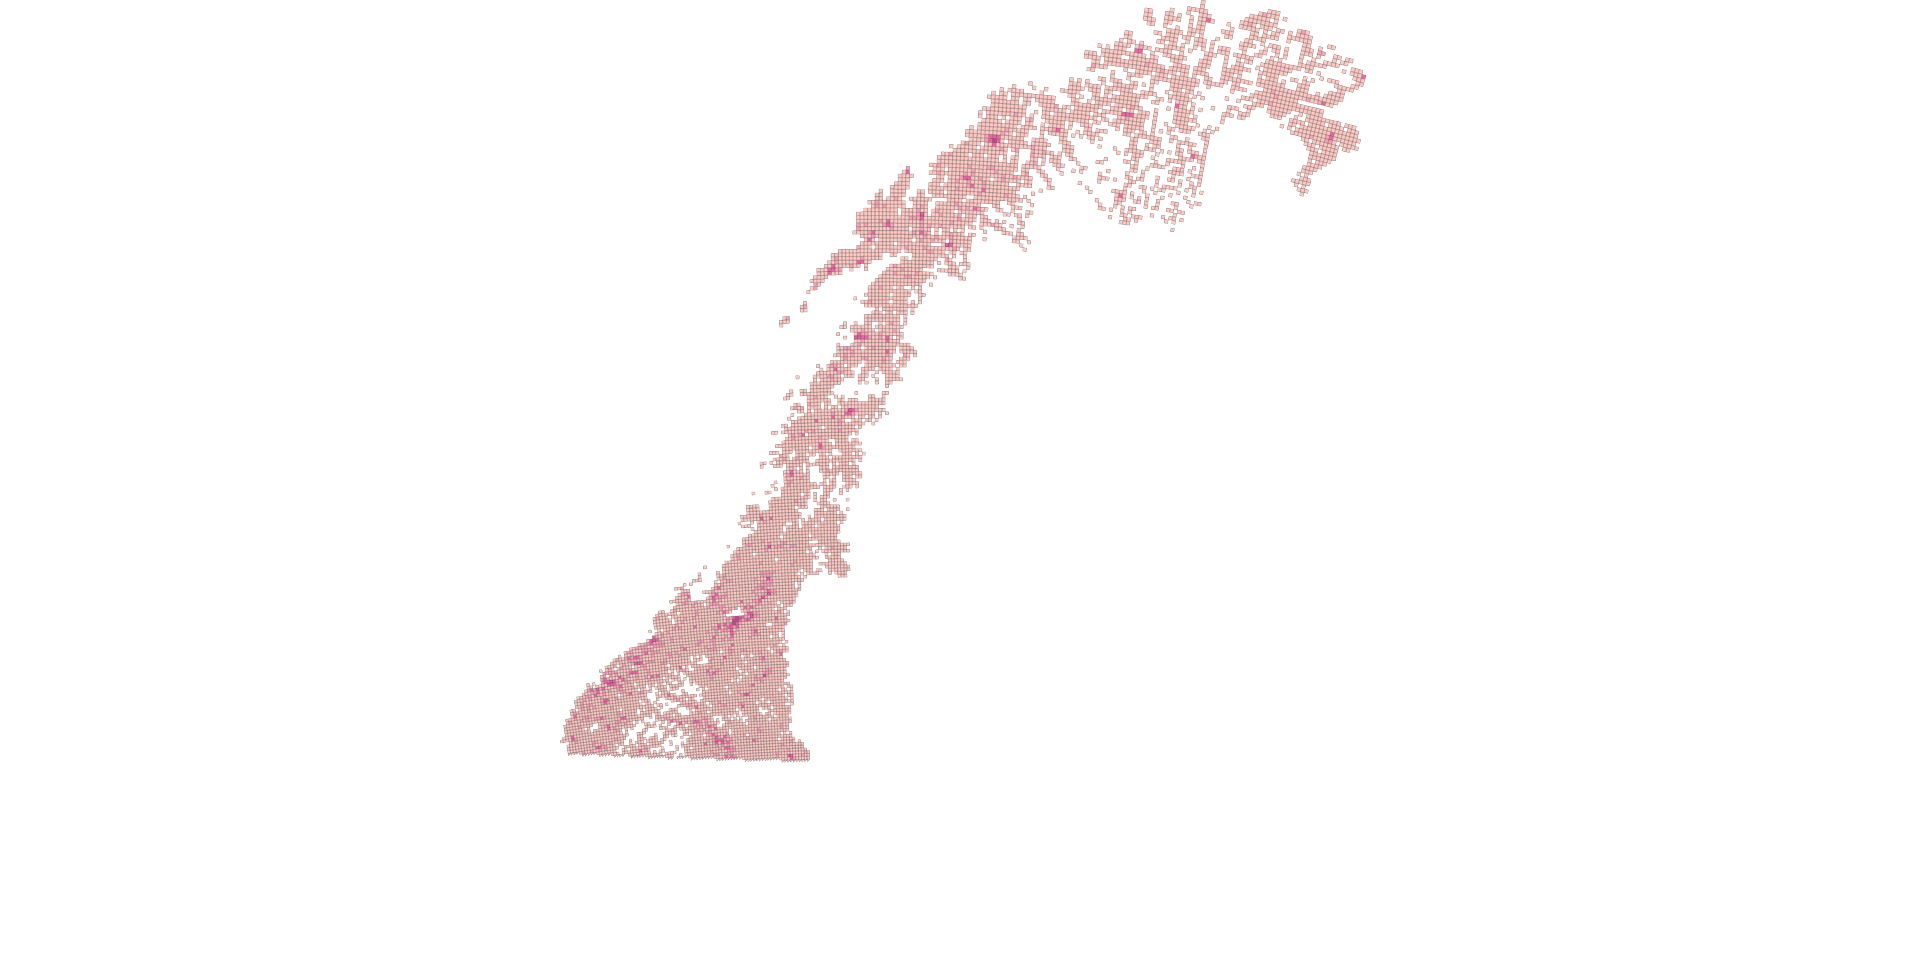 How many buildings? Map of number of buildings per 5km*5km grid in Norway (2023)